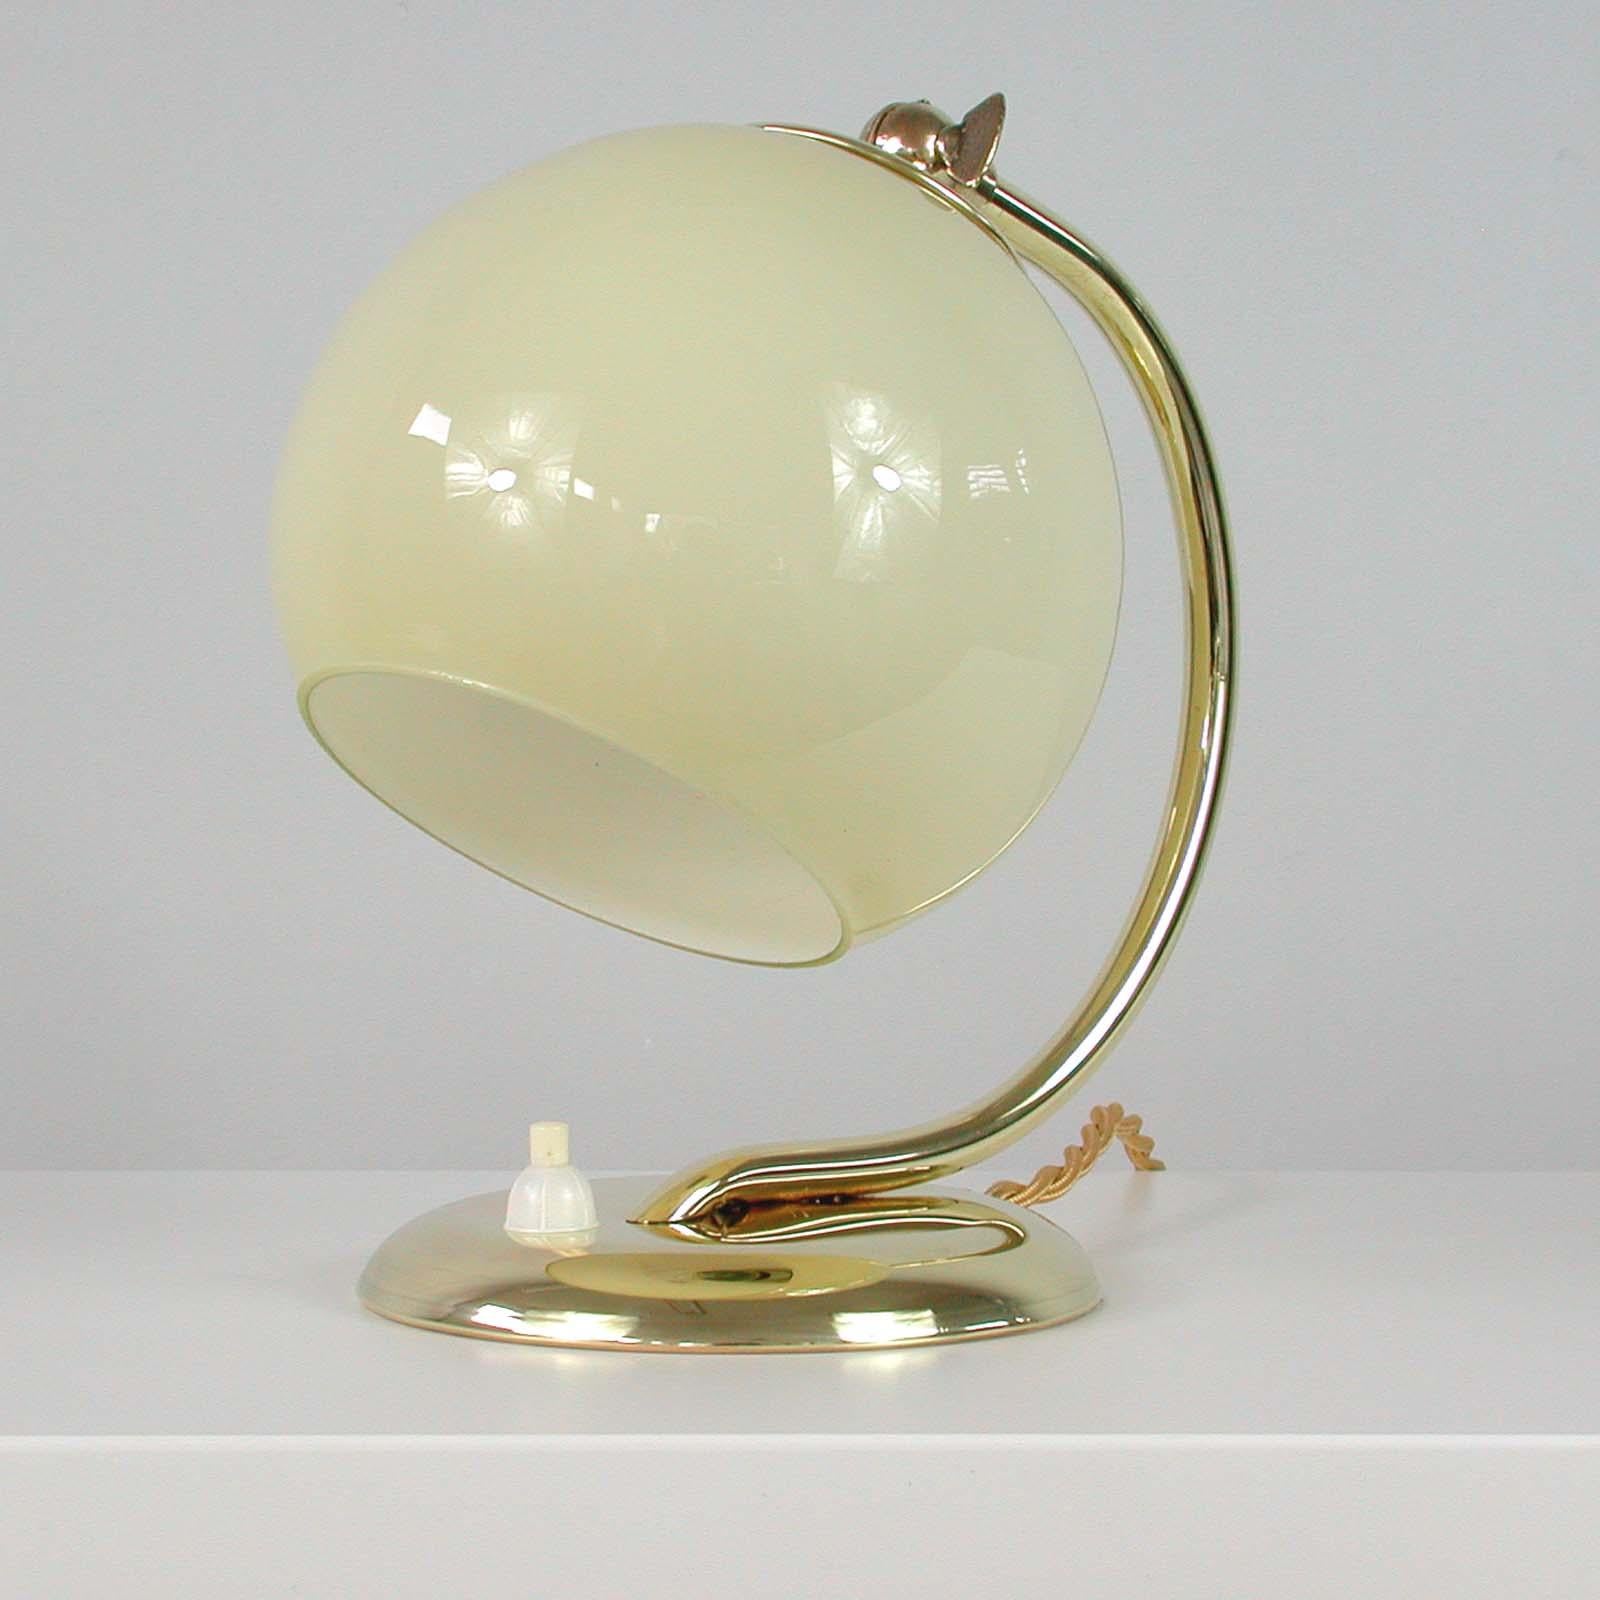 This unusual vintage table or bedside lamp was made in Germany in the 1930s during the Bauhaus period. It is made of polished brass and has got an adjustable lamp shade in cream/yellow opaline glass.

The lamp can be used as a table lamp as well